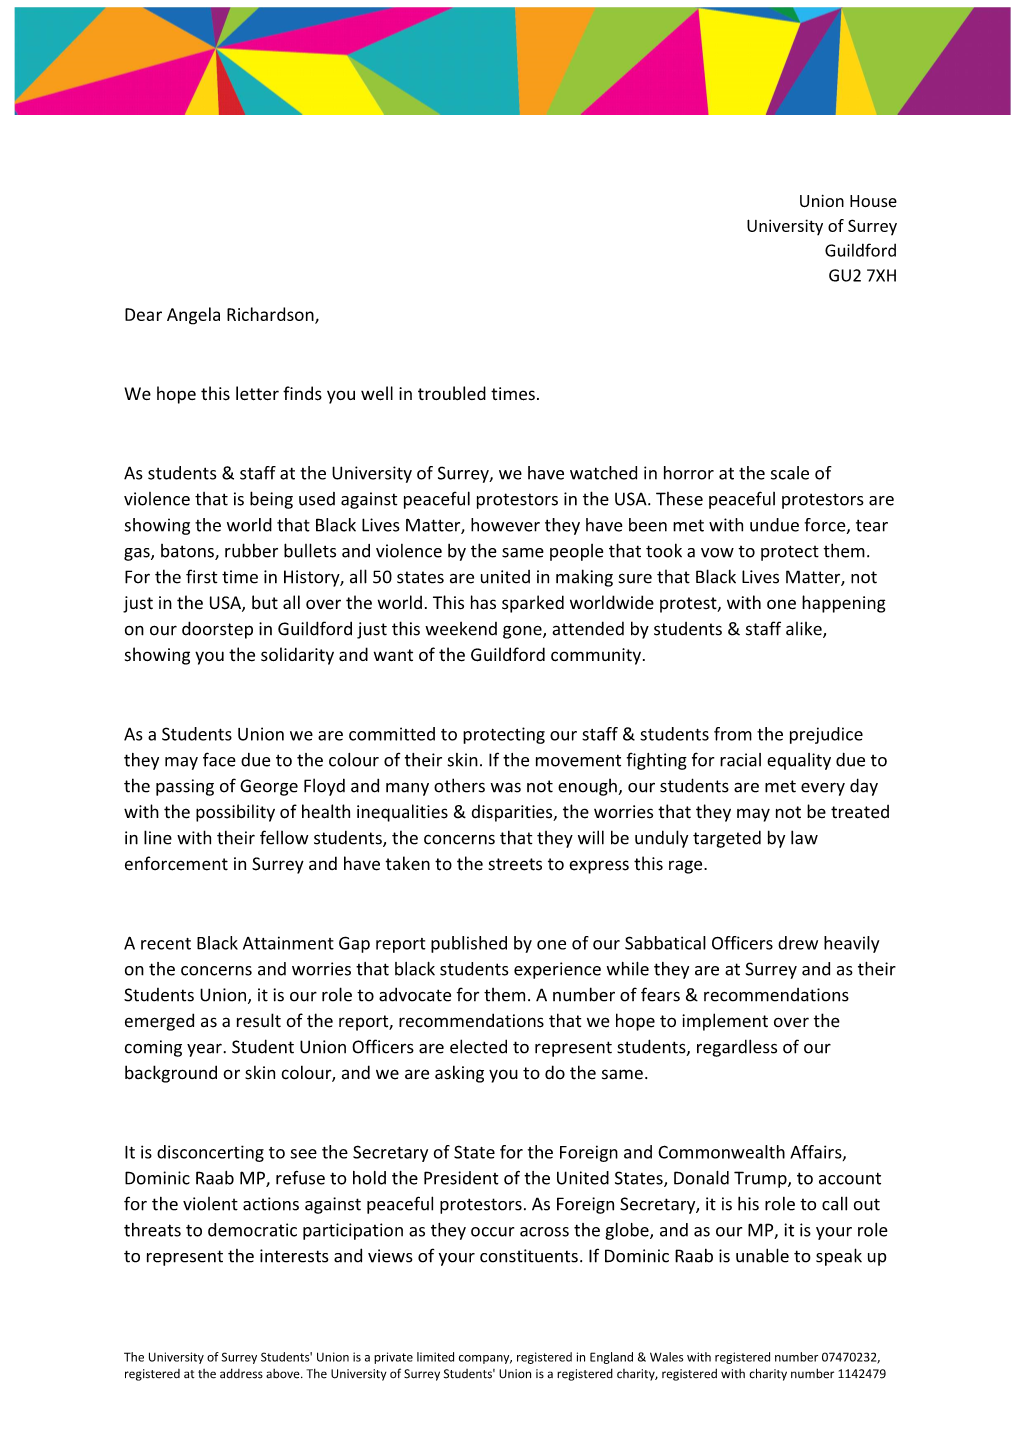 Dear Angela Richardson, We Hope This Letter Finds You Well in Troubled